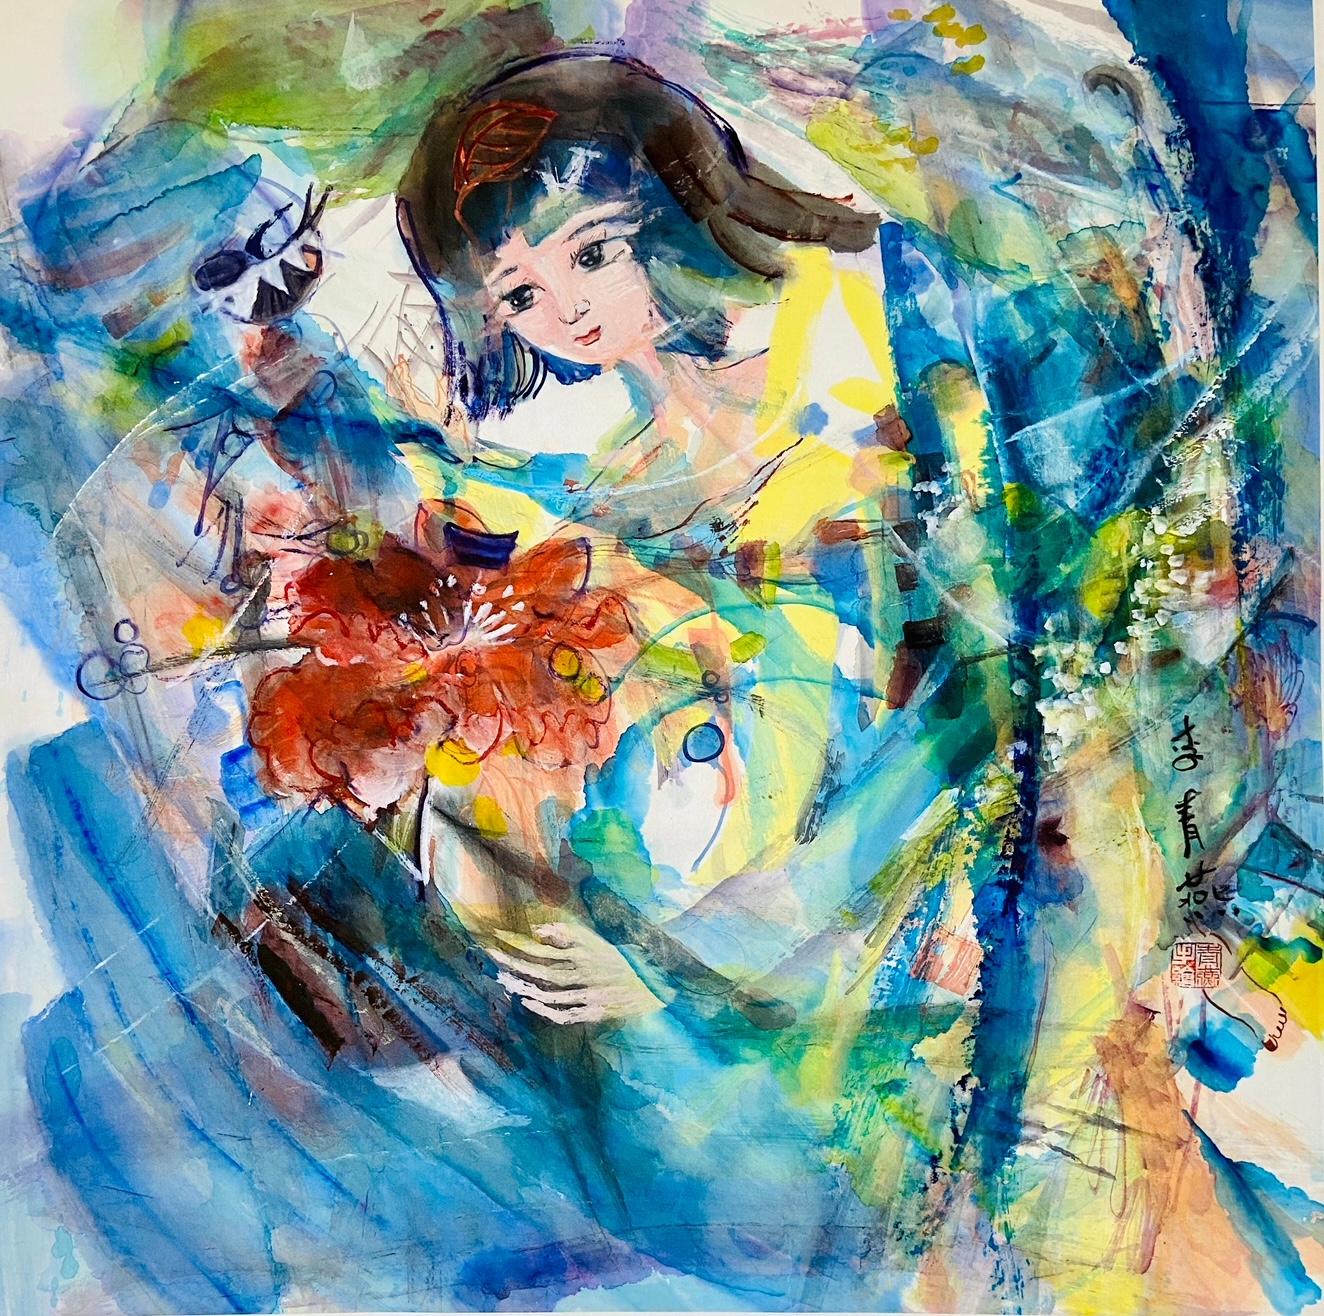 Ink & watercolor on rice paper, Framed 80 x 80 x 5 cm

Li Qingyan is a female Chinese artist born in 1972 who lives and works in Beijing, China. Qingyan is a painter by profession. She is member from China Contemporary Women's Painting Society,